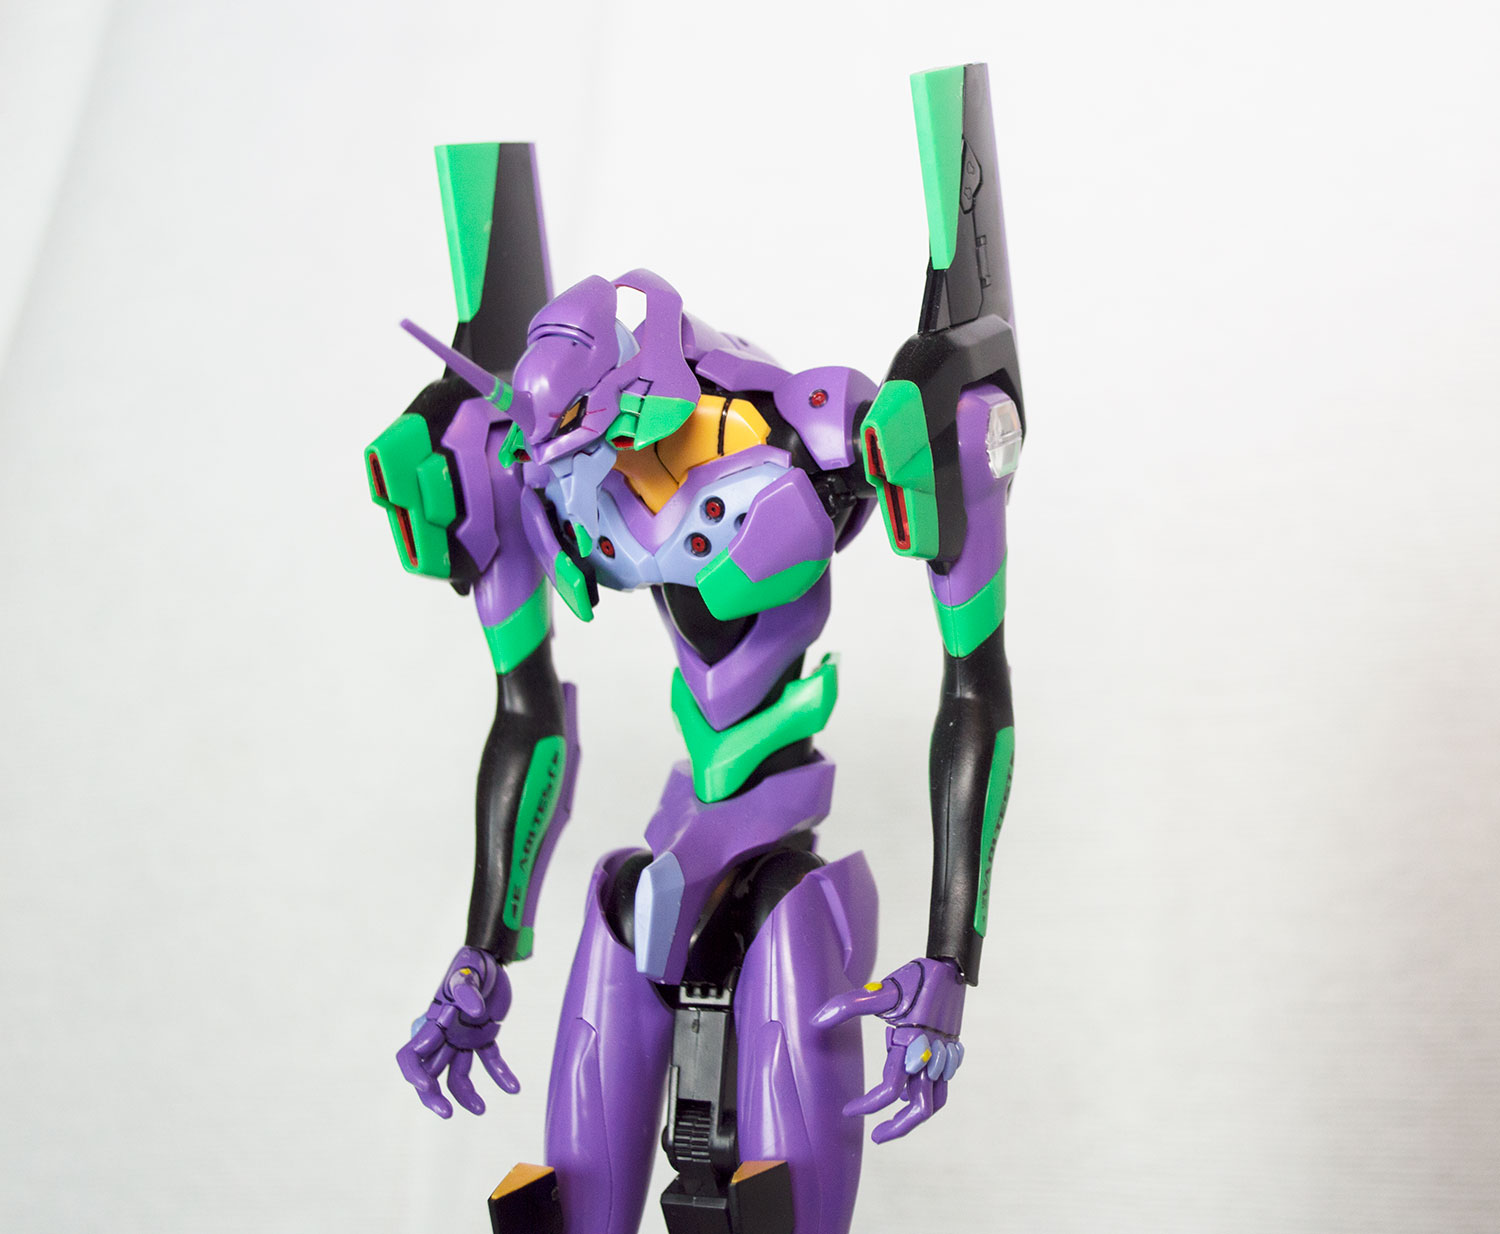 Evangelion Unit 01 Test Type Model by Bandai Review.